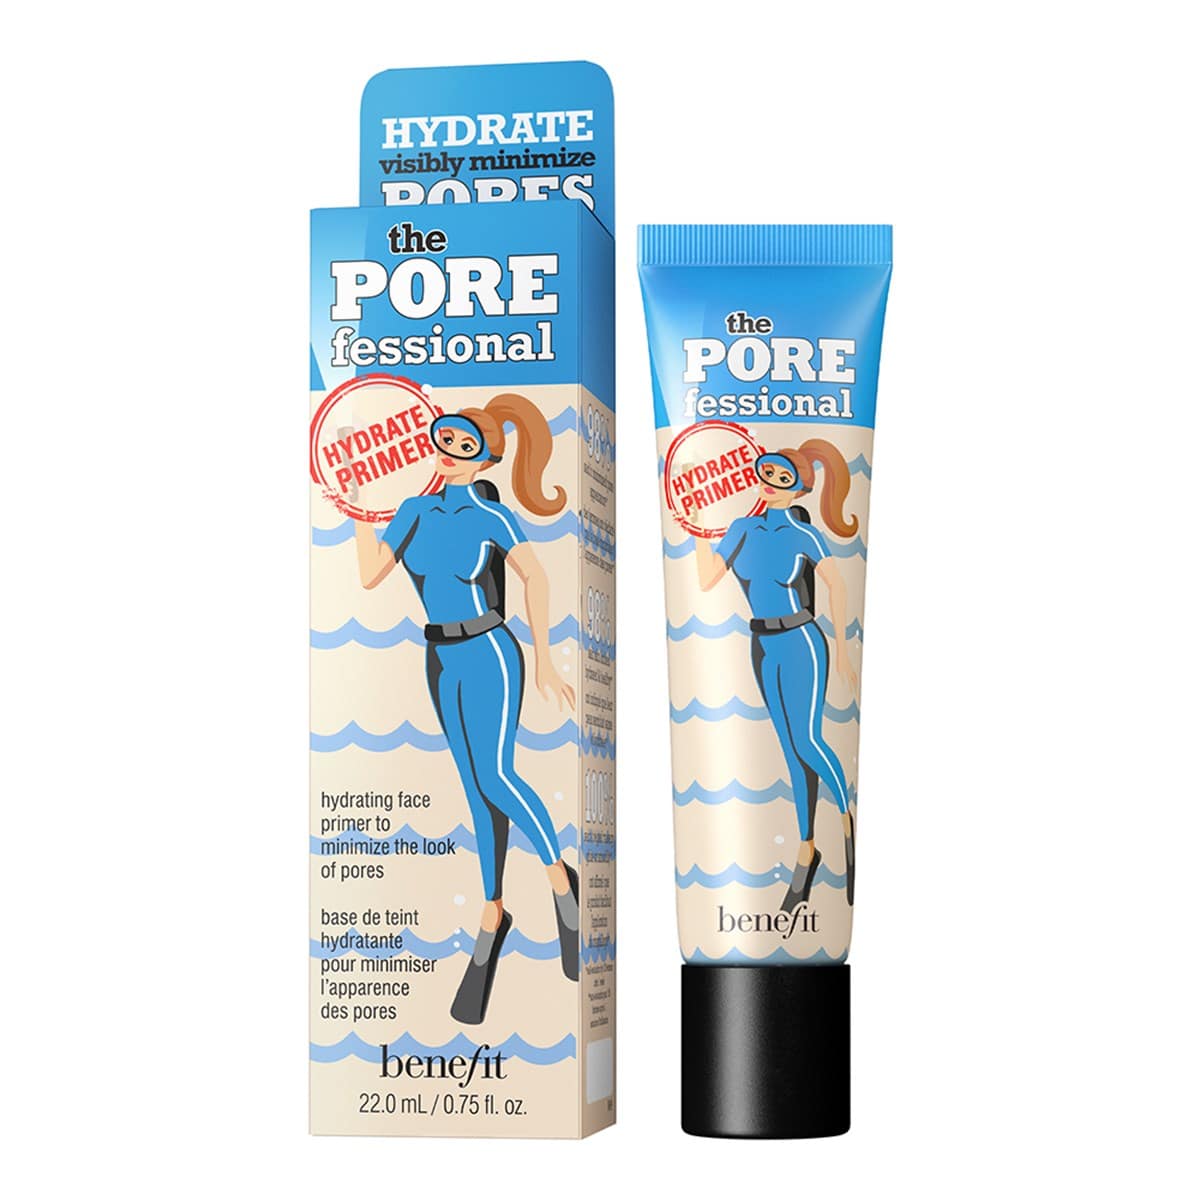 The POREfessional: Hydrate Primer Hydrating face primer to minimize the look of pores by Benefit